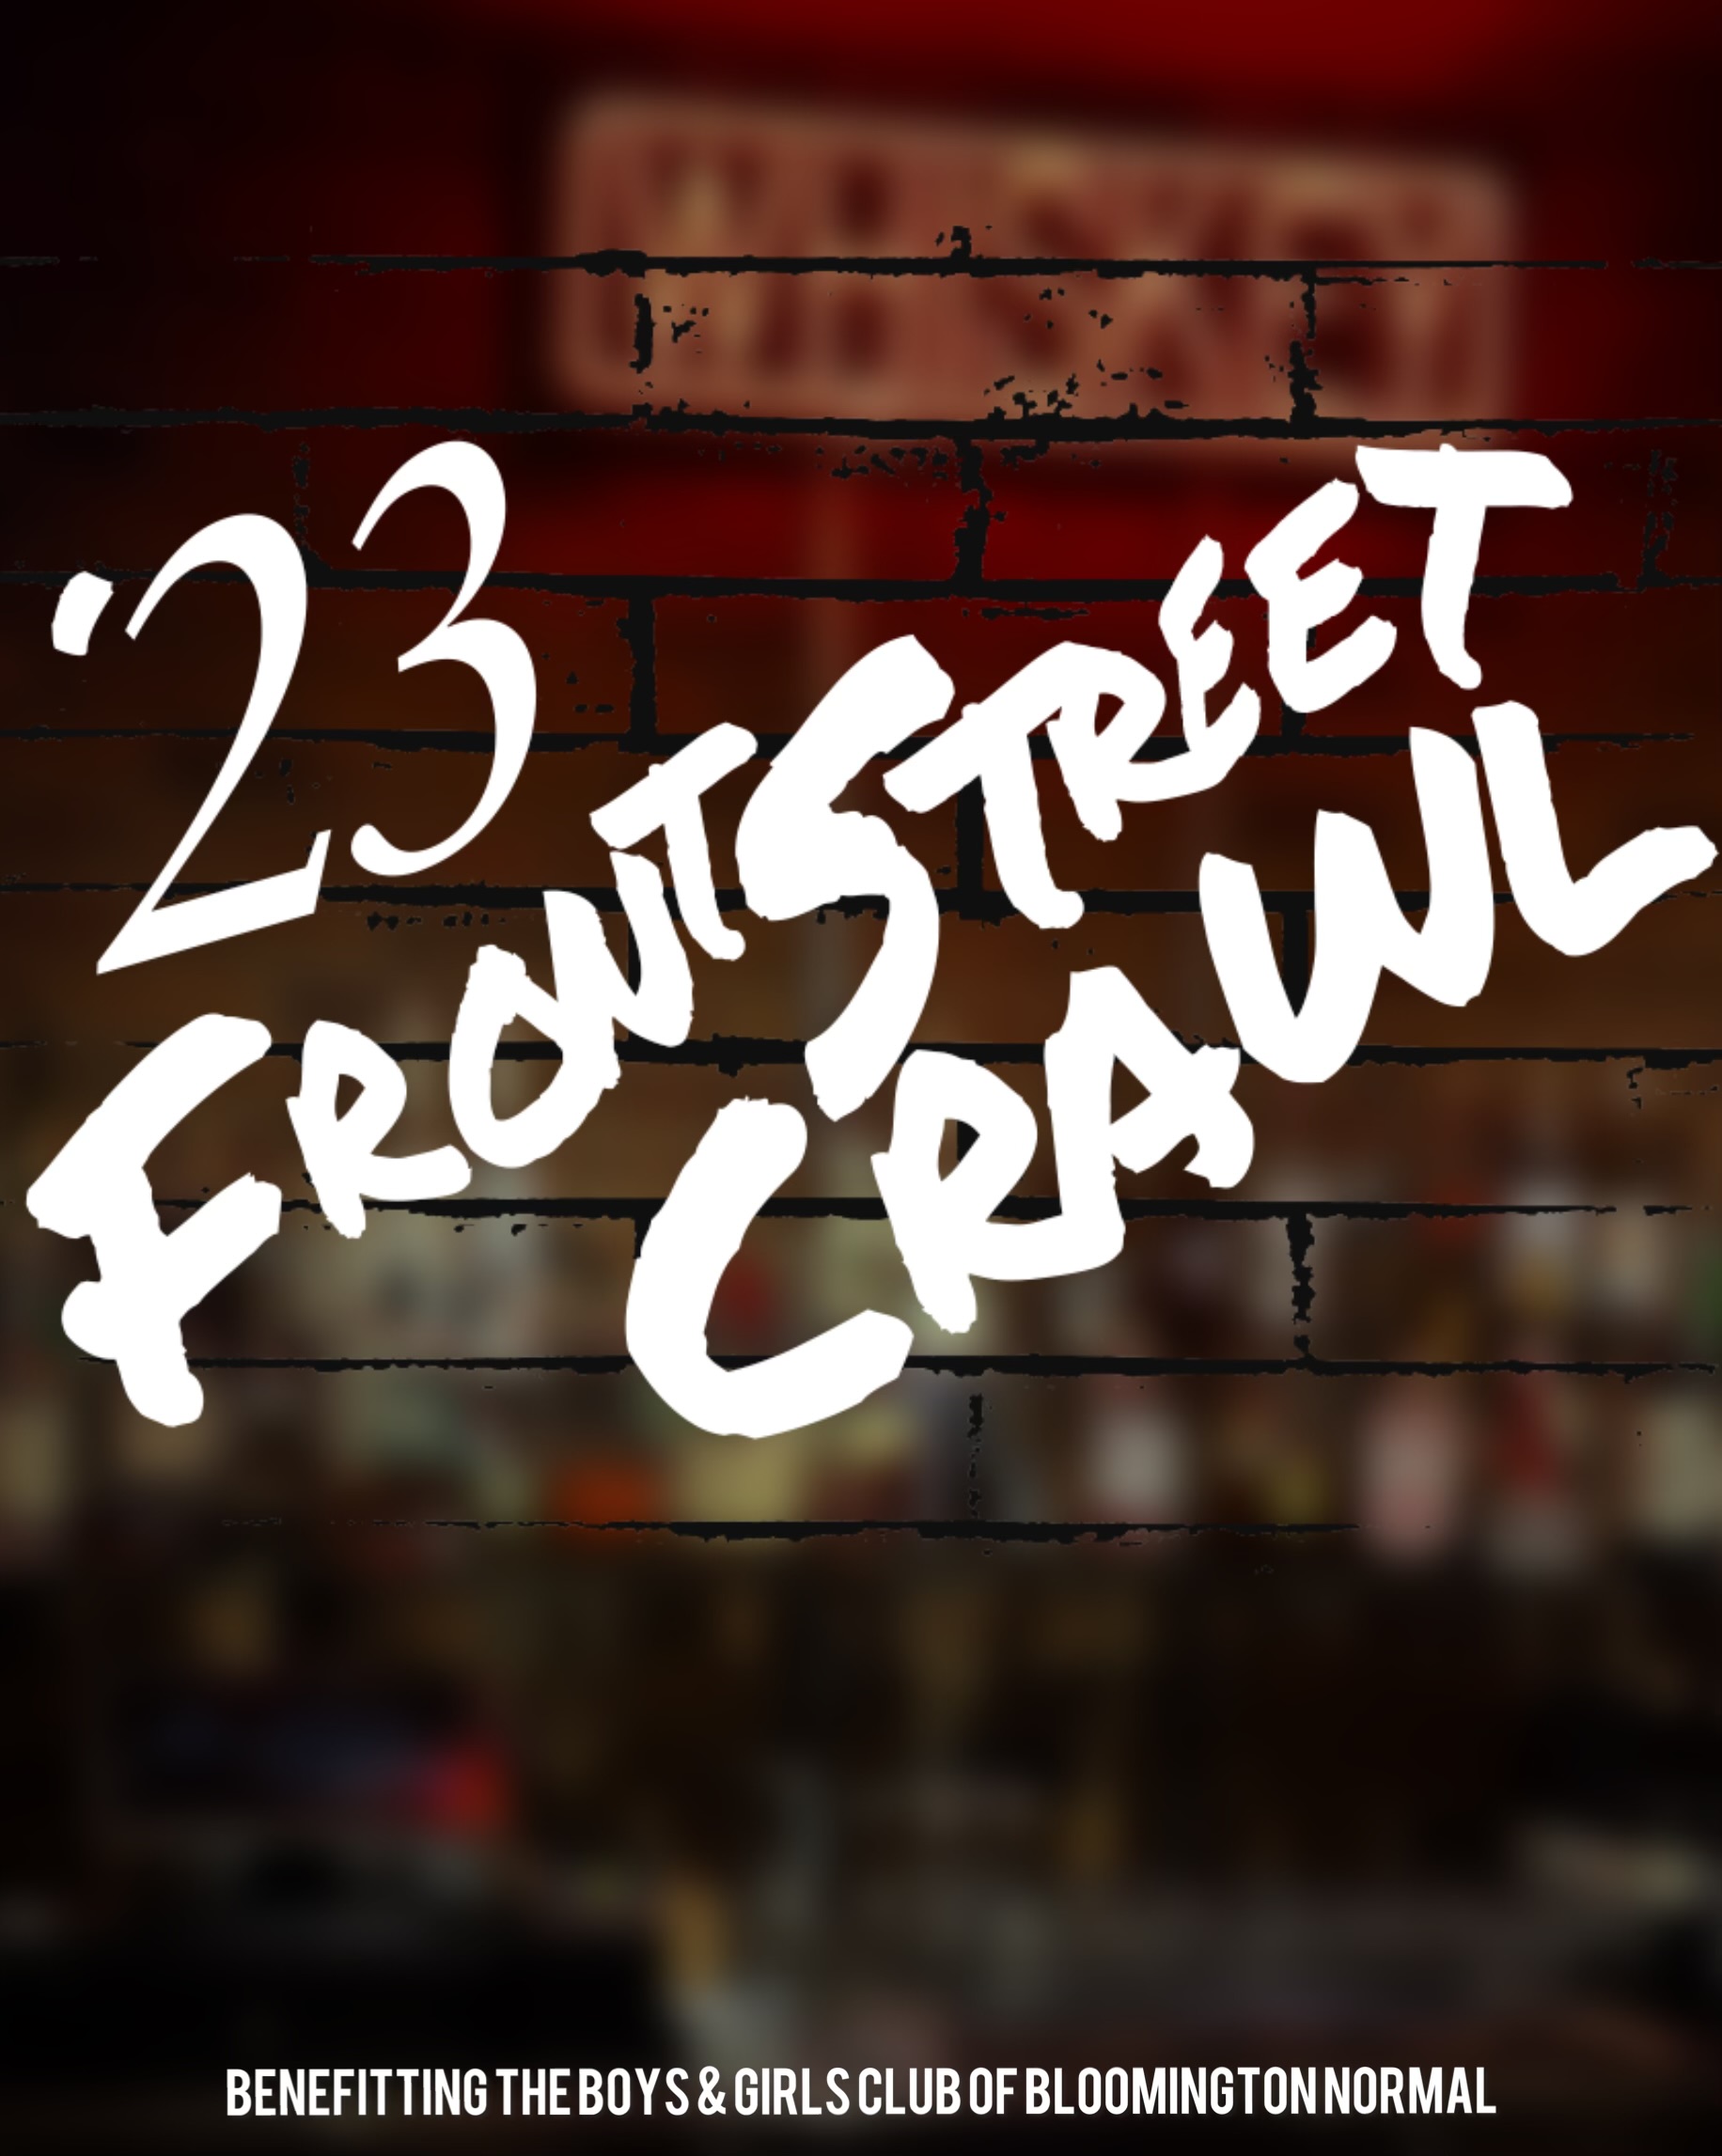 The Front Street Crawl